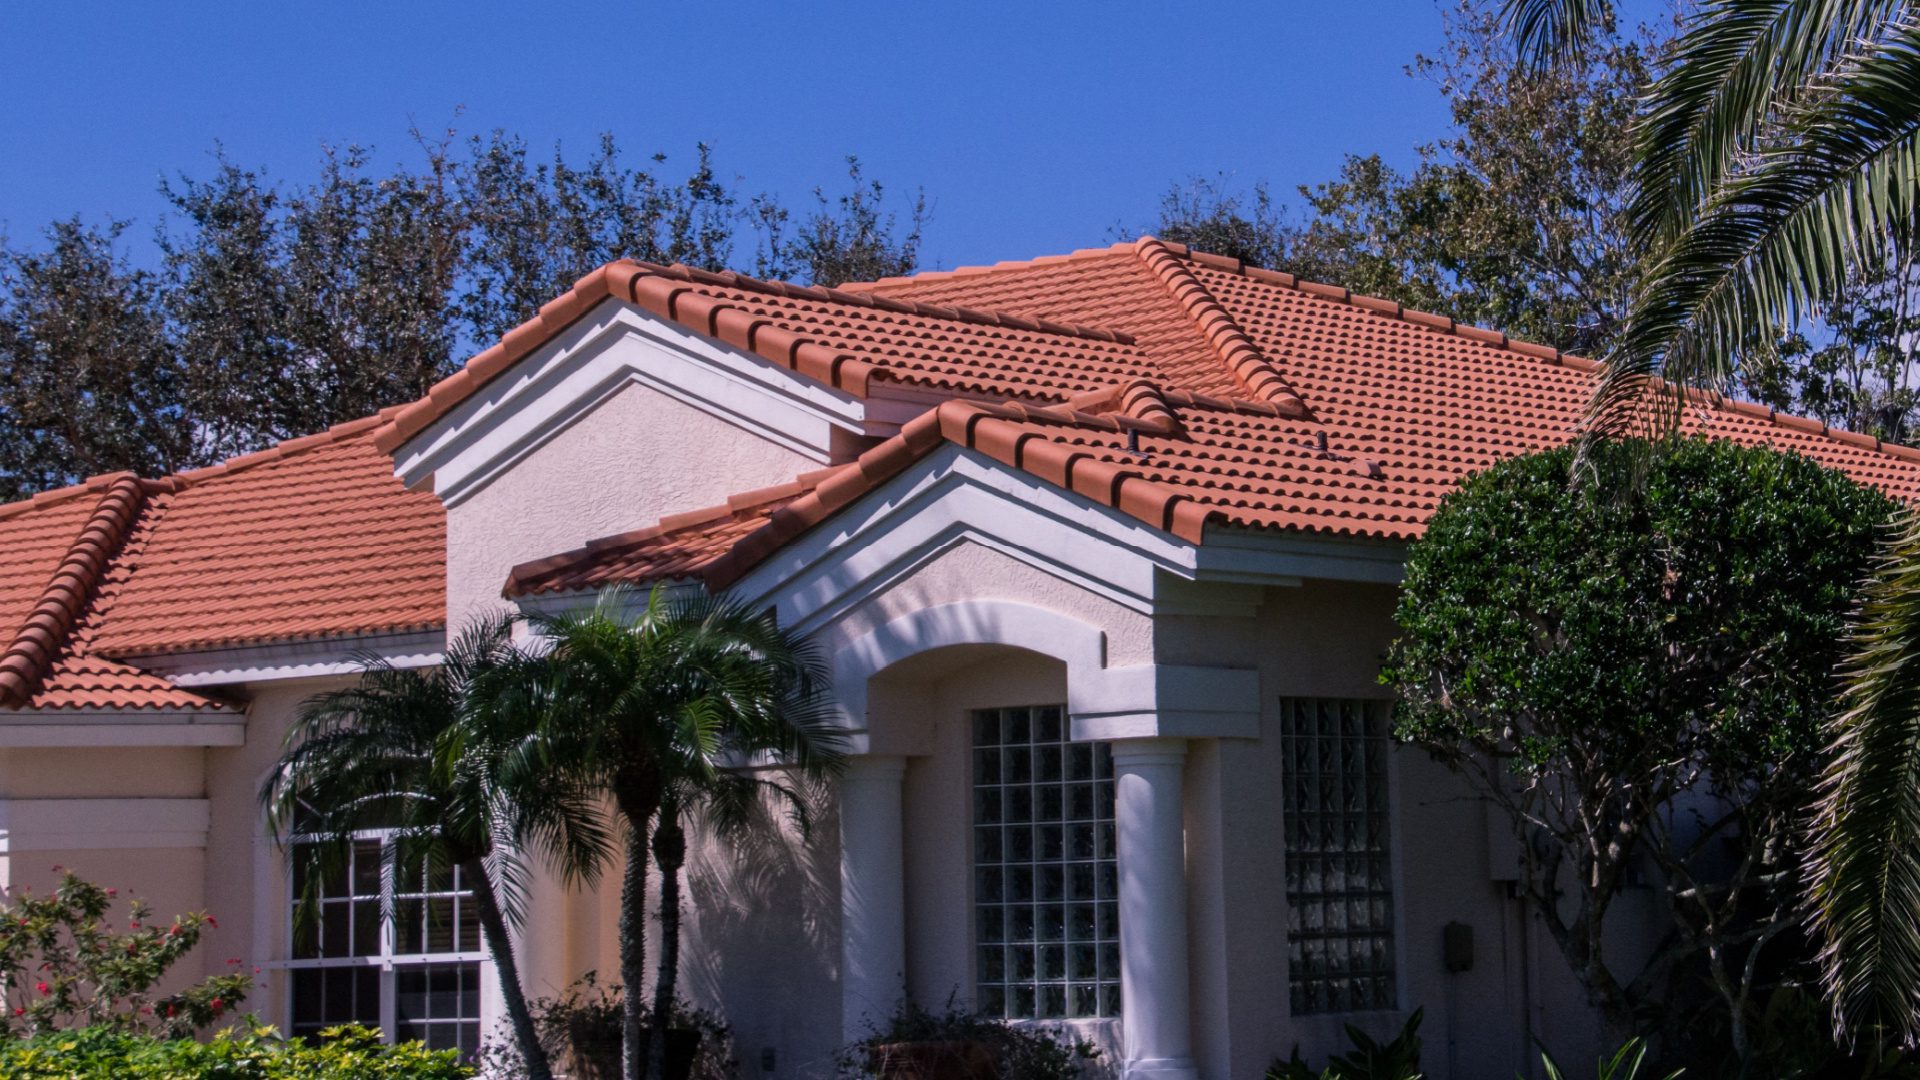 Fort Myers Residential and Commercial Tile Roofing